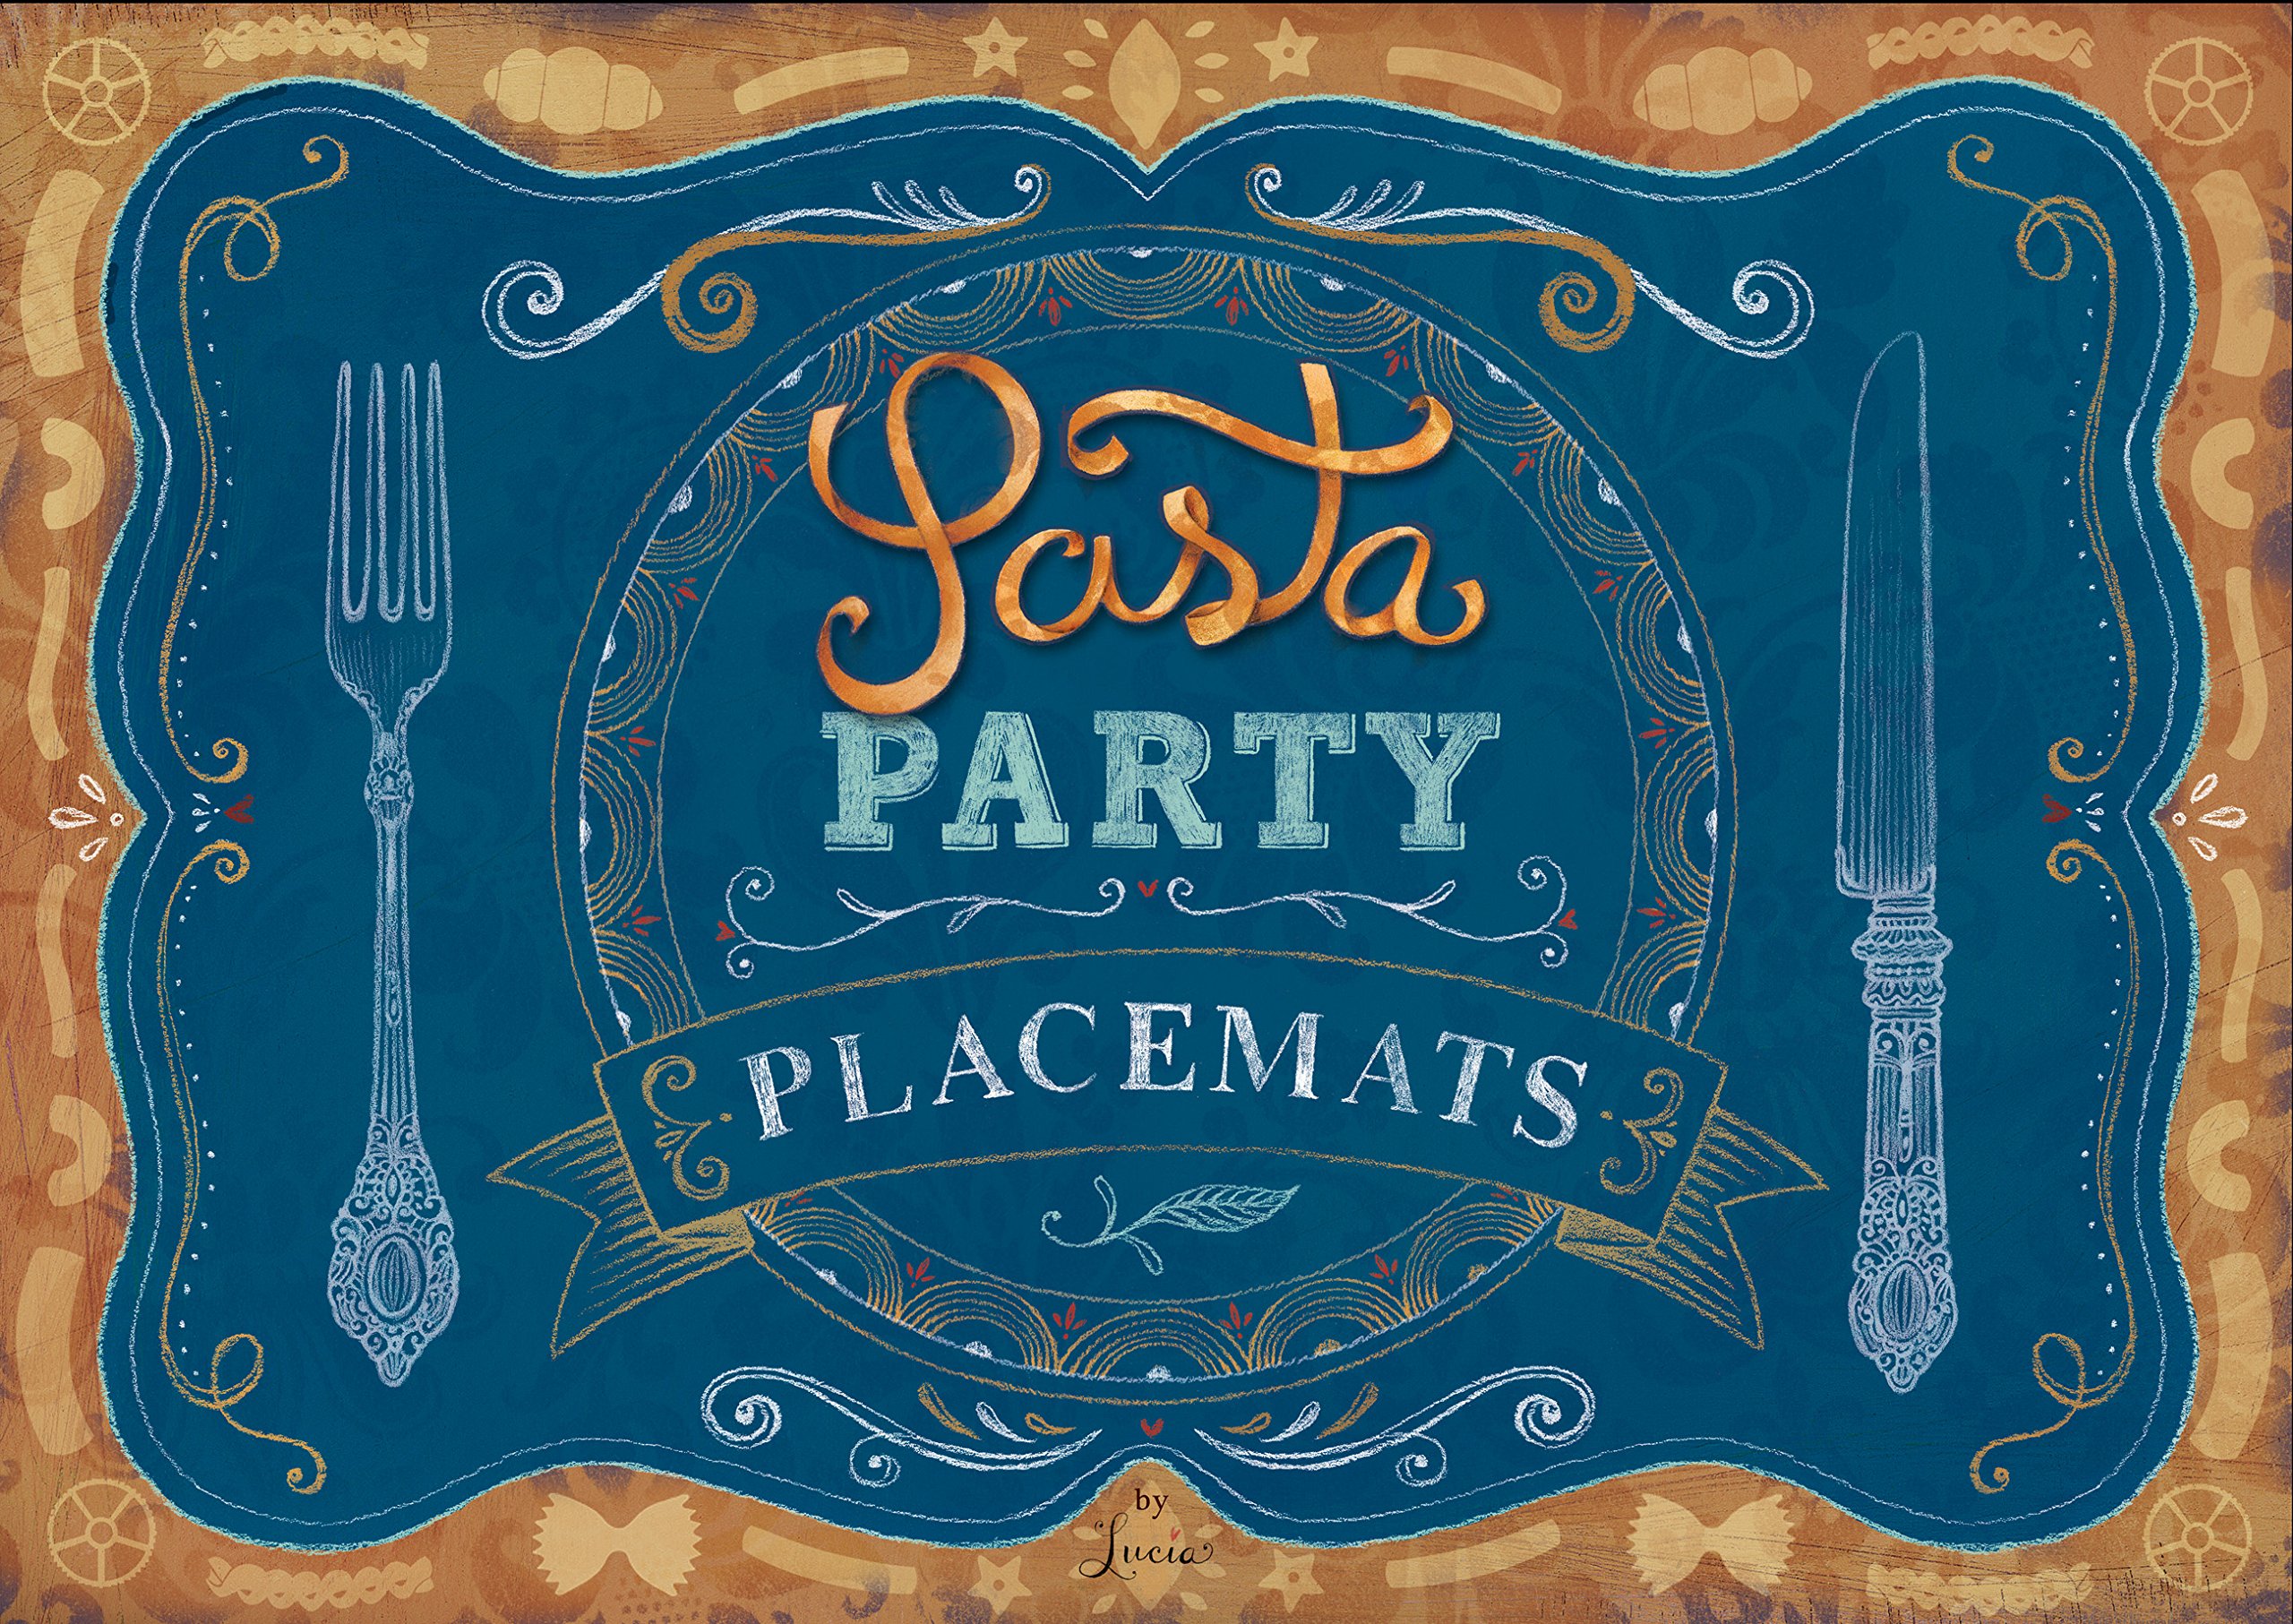 Pasta Party Placemats